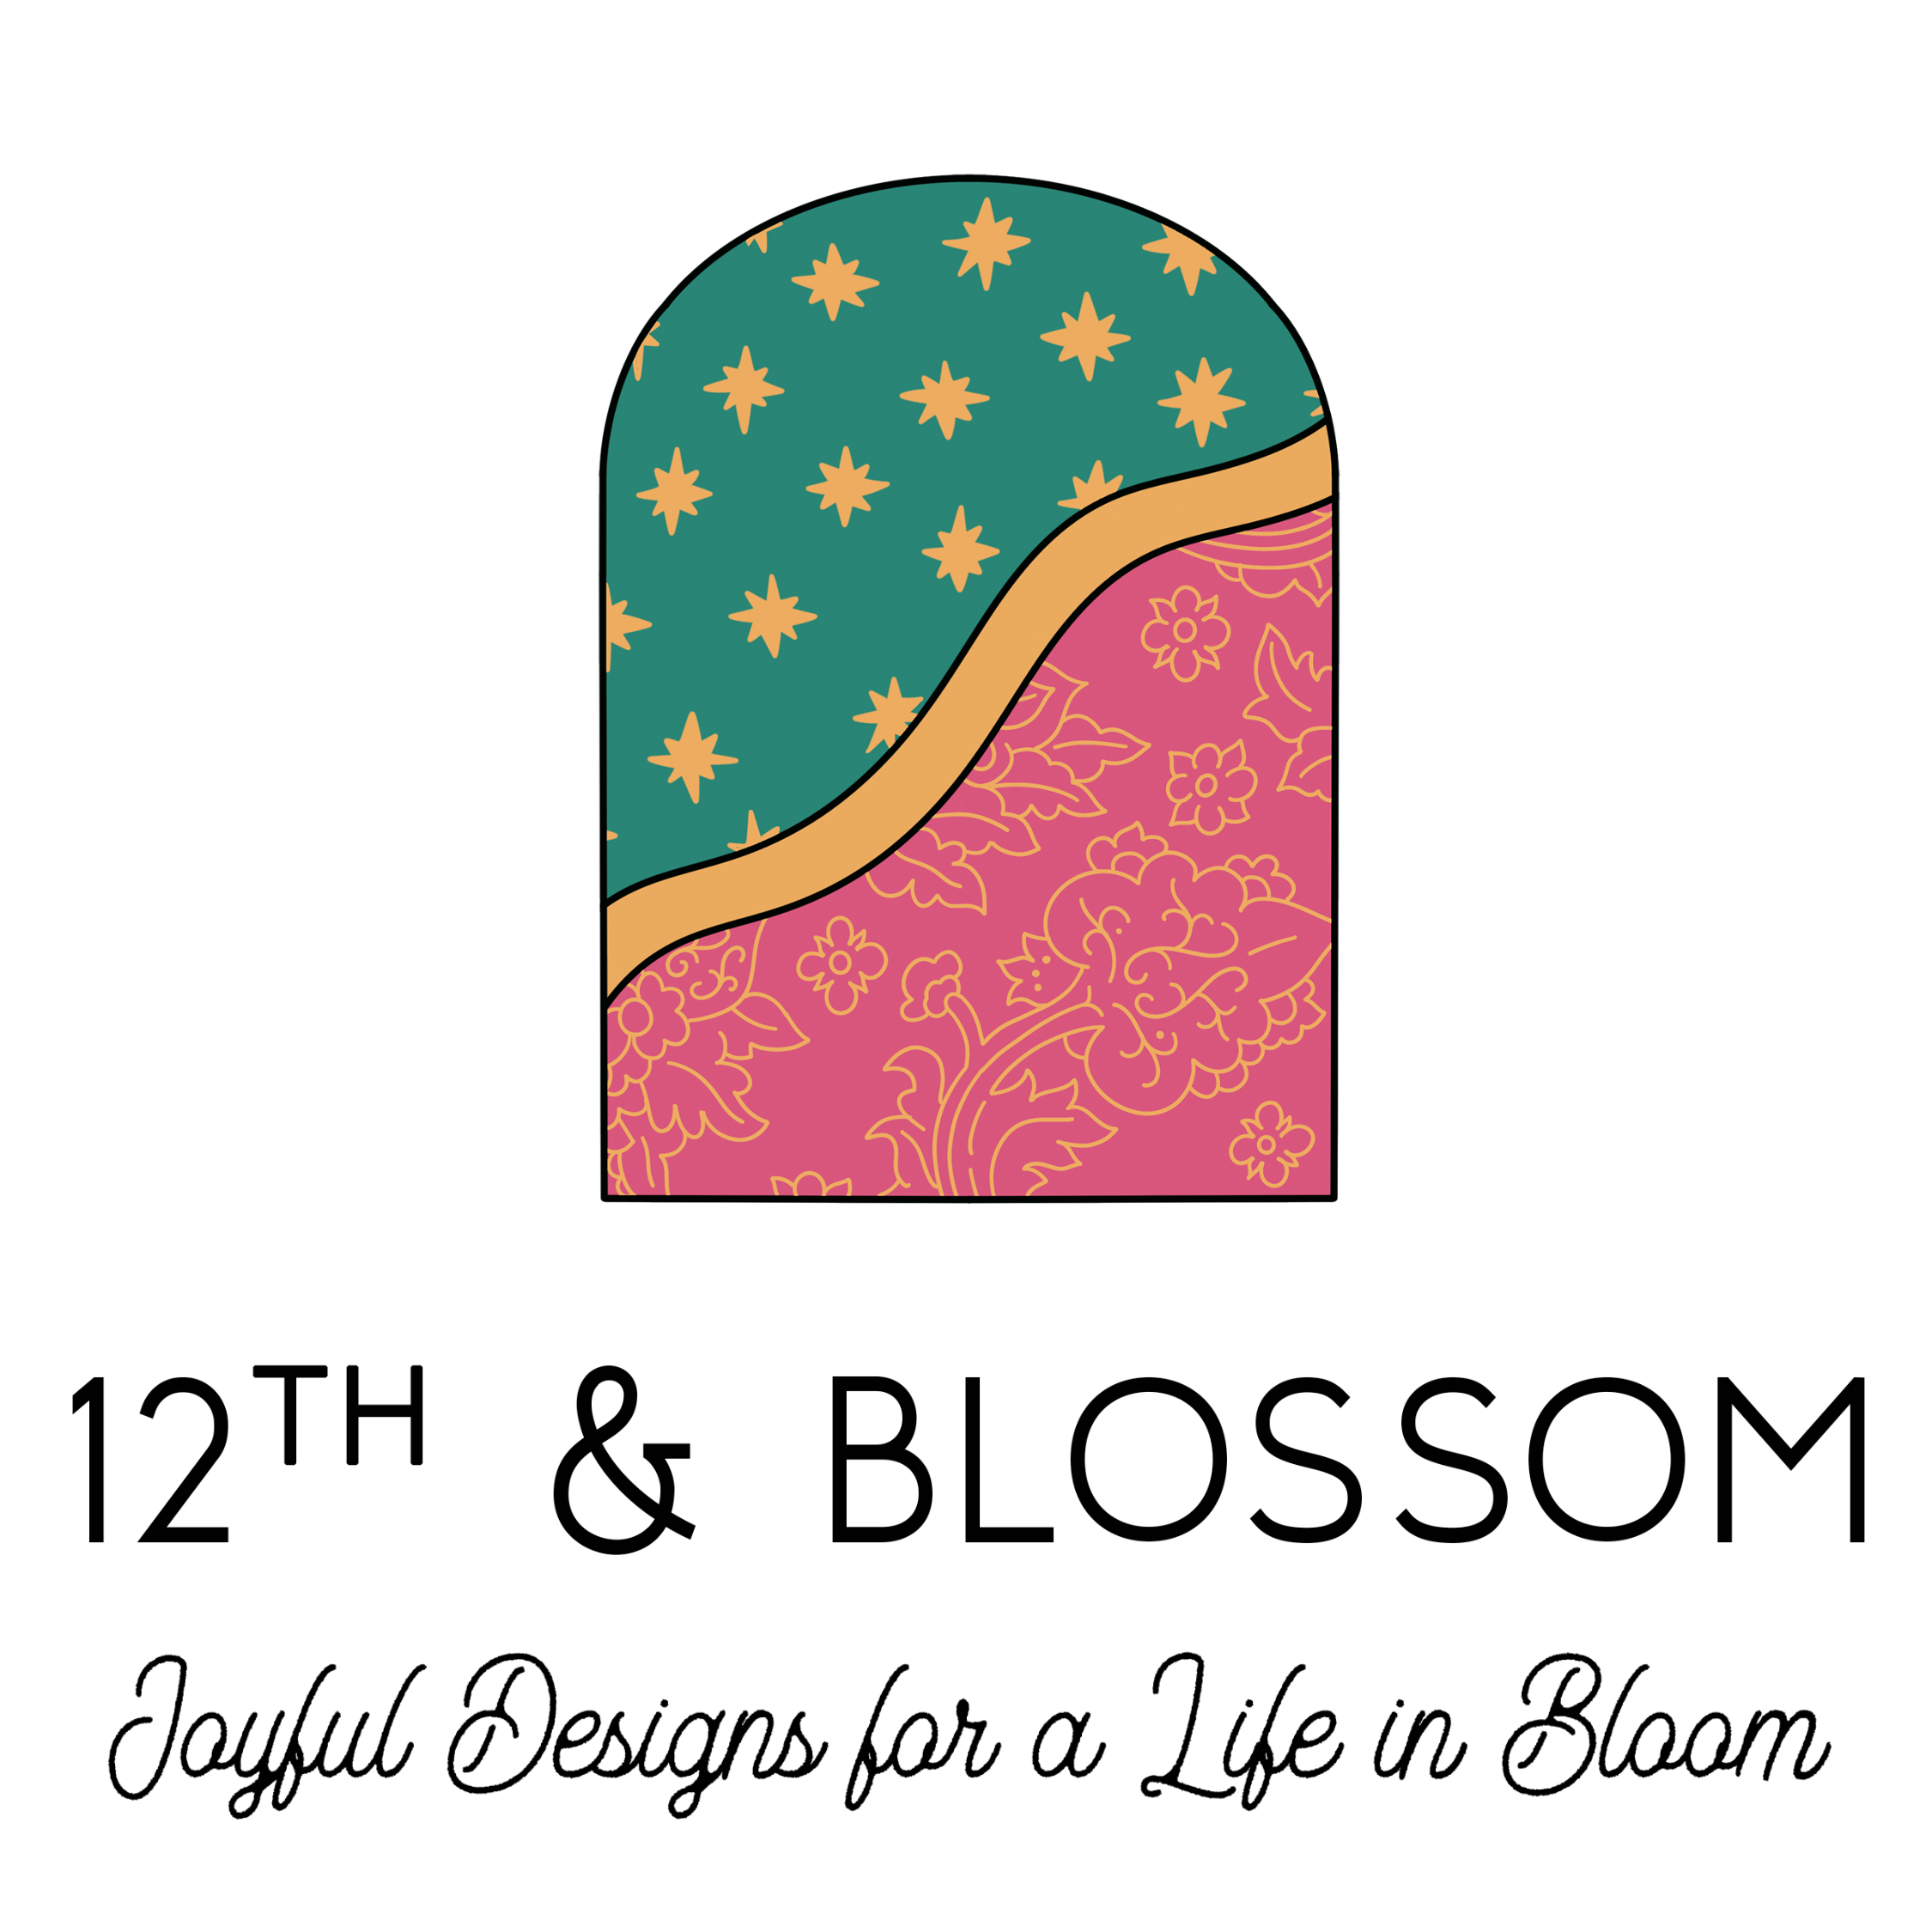 Twelfth and Blossom